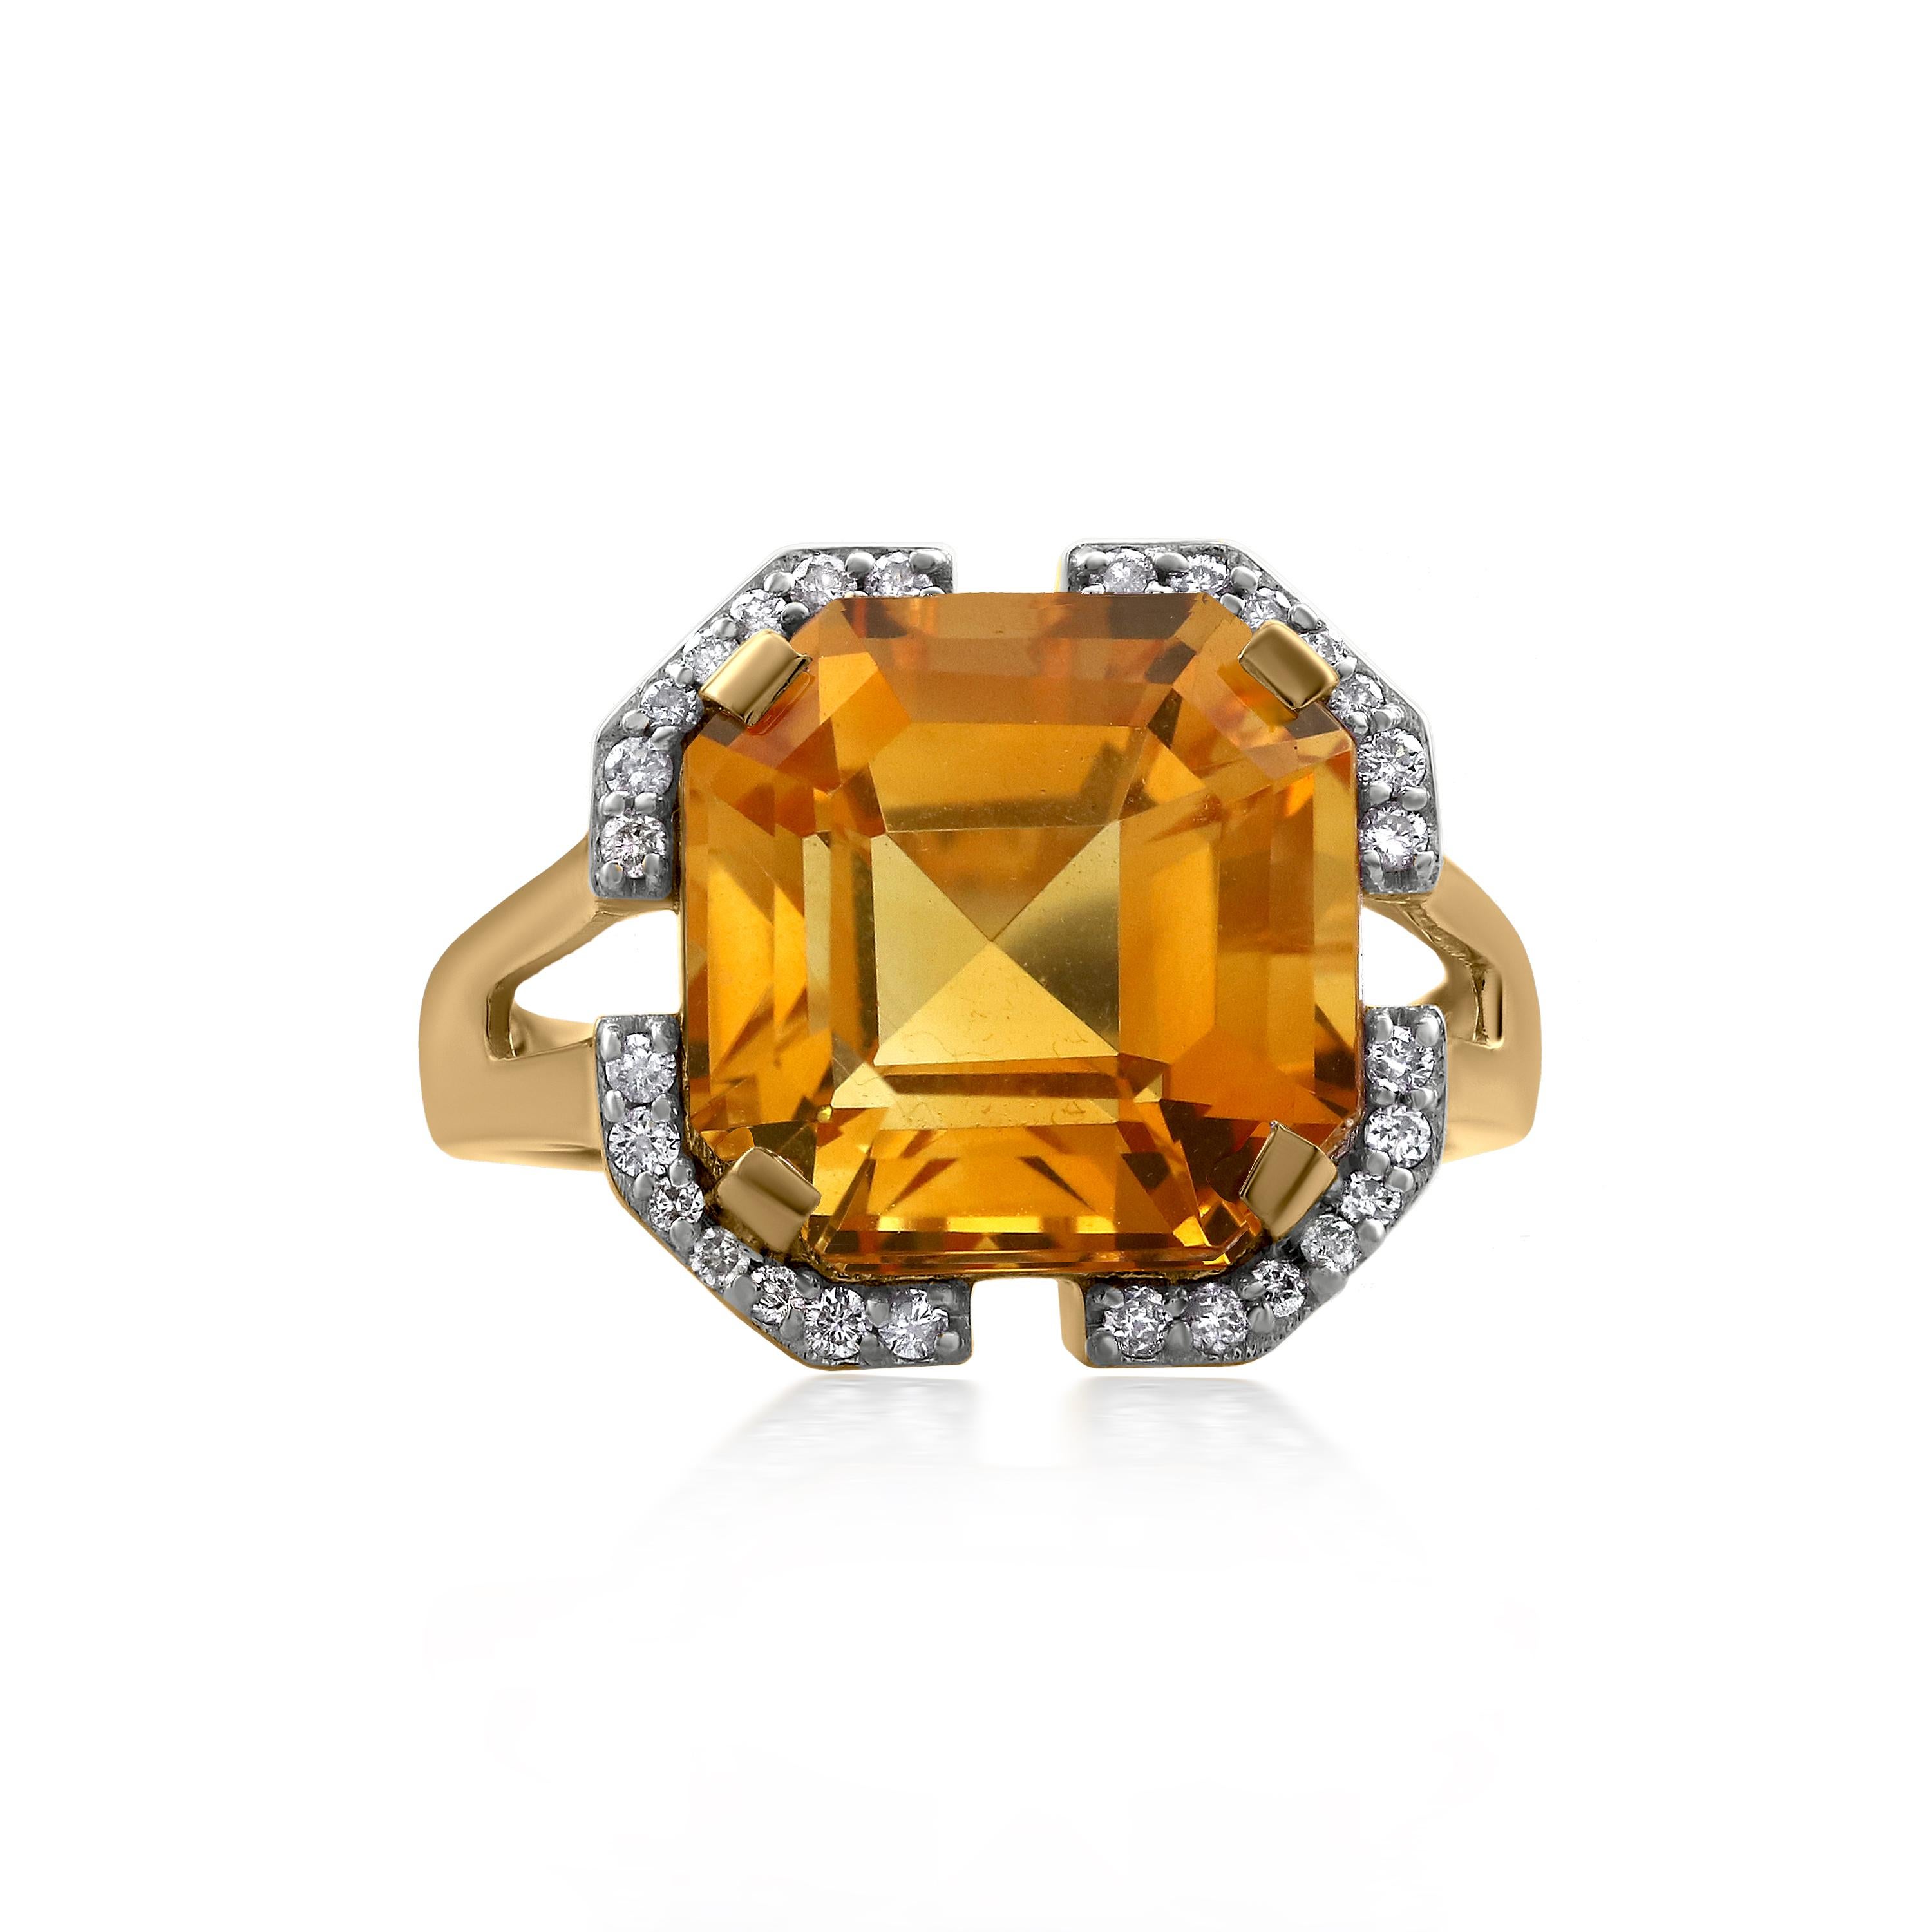 Sweet as honey hue. This Gemistry solitaire ring features in the center an 7.4 carat asscher cut, octagon citrine, prong set on an openwork gallery of polished 14k yellow gold with tapered shank. The corners of the center stone are further